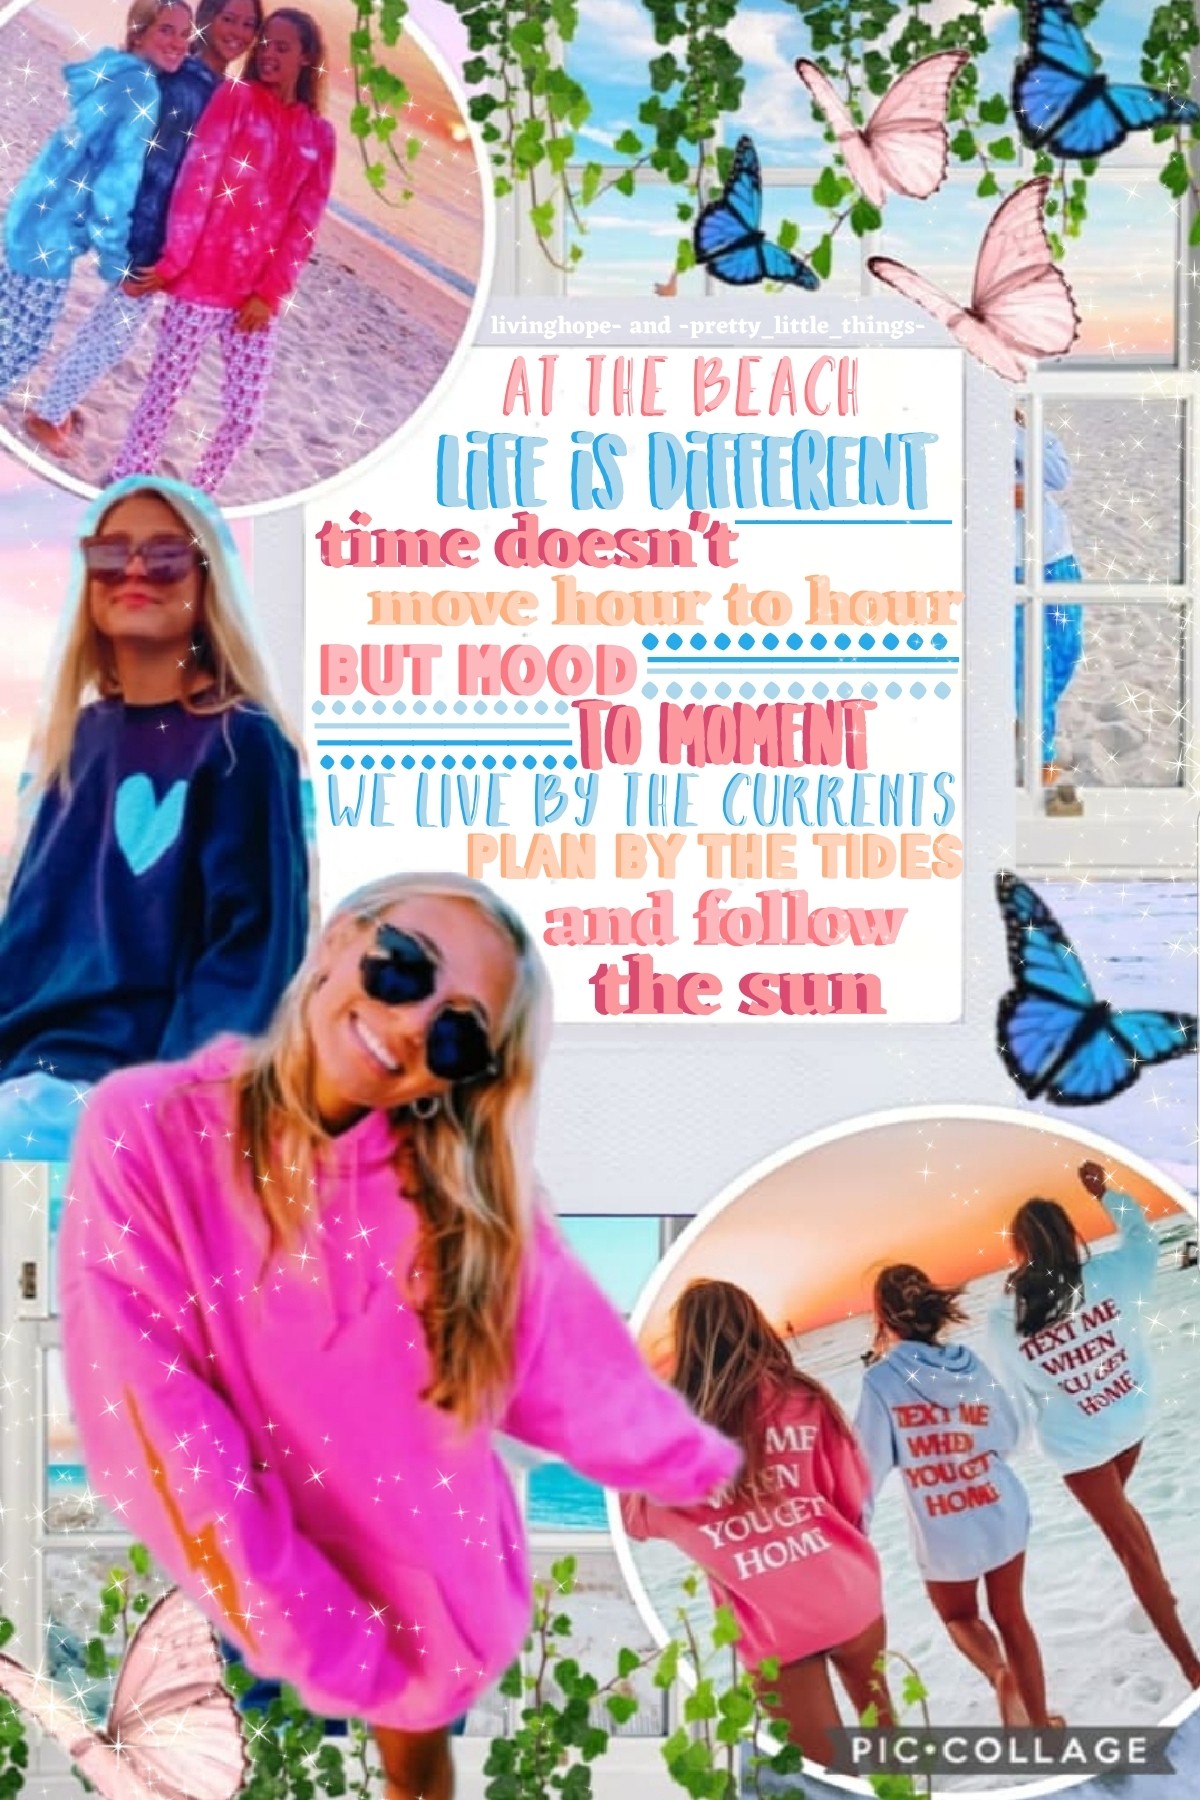 5•30•22 (tap!)
wow I haven't posted in almost a month yikes... anyways here's a collab with one of the best collagers here -pretty_little_things-!! she did the breathtaking bg and I did the text!! I hope you all have had an amazing weekend and if you're f